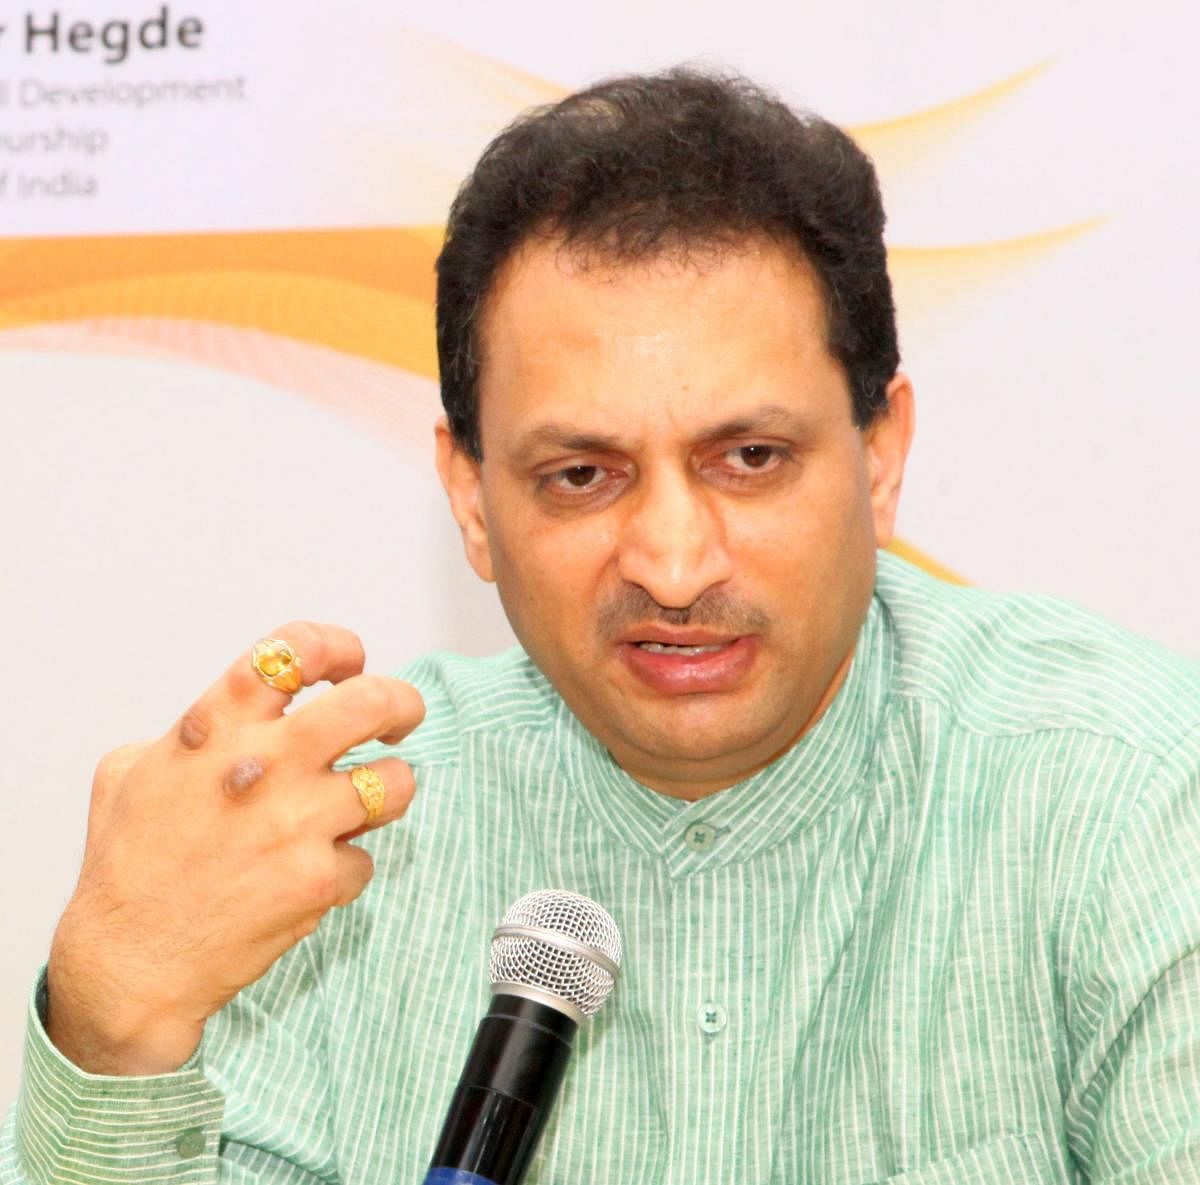 Is accepting Constitution itself nationalism, asks Hegde